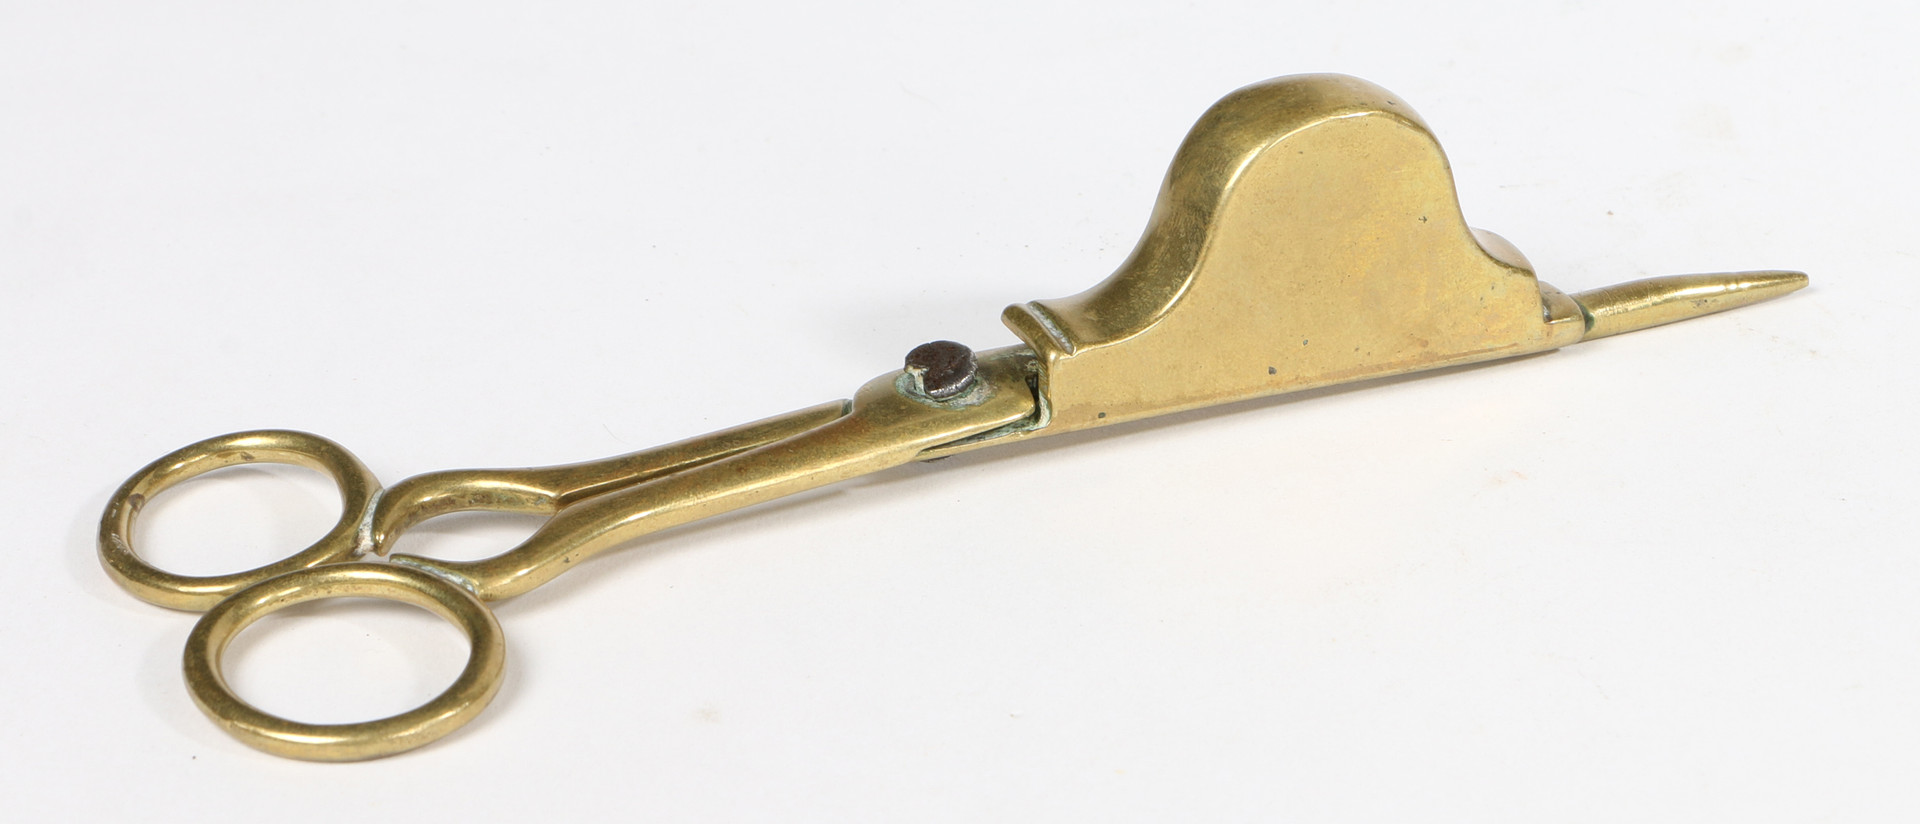 A PAIR OF GEORGE II MAKER STAMPED BRASS CANDLE-SNUFFERS, CIRCA 1720-40. - Image 3 of 3